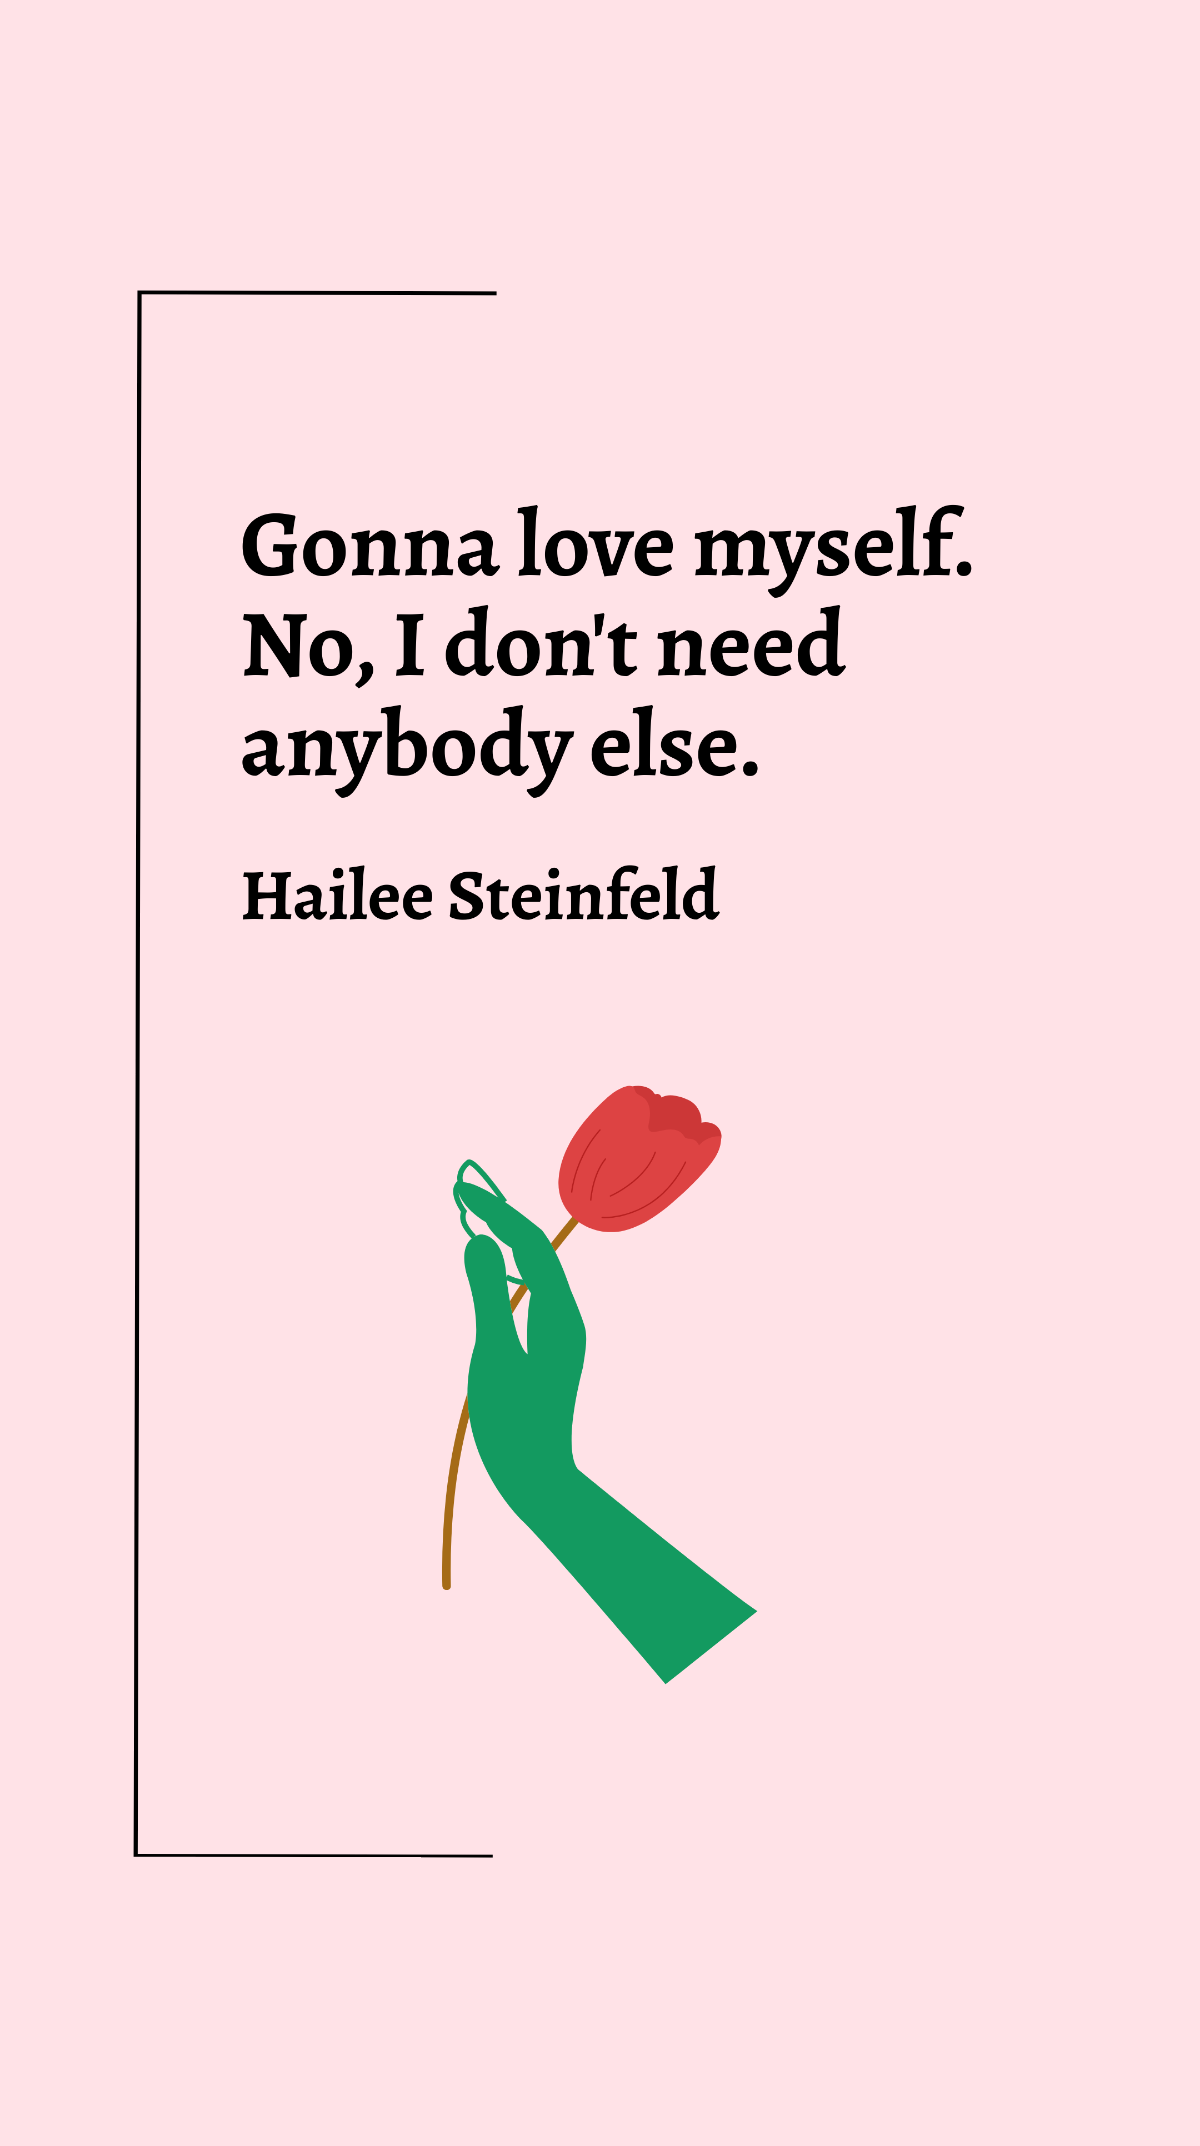 Free Hailee Steinfeld - Gonna love myself. No, I don't need anybody else. Template